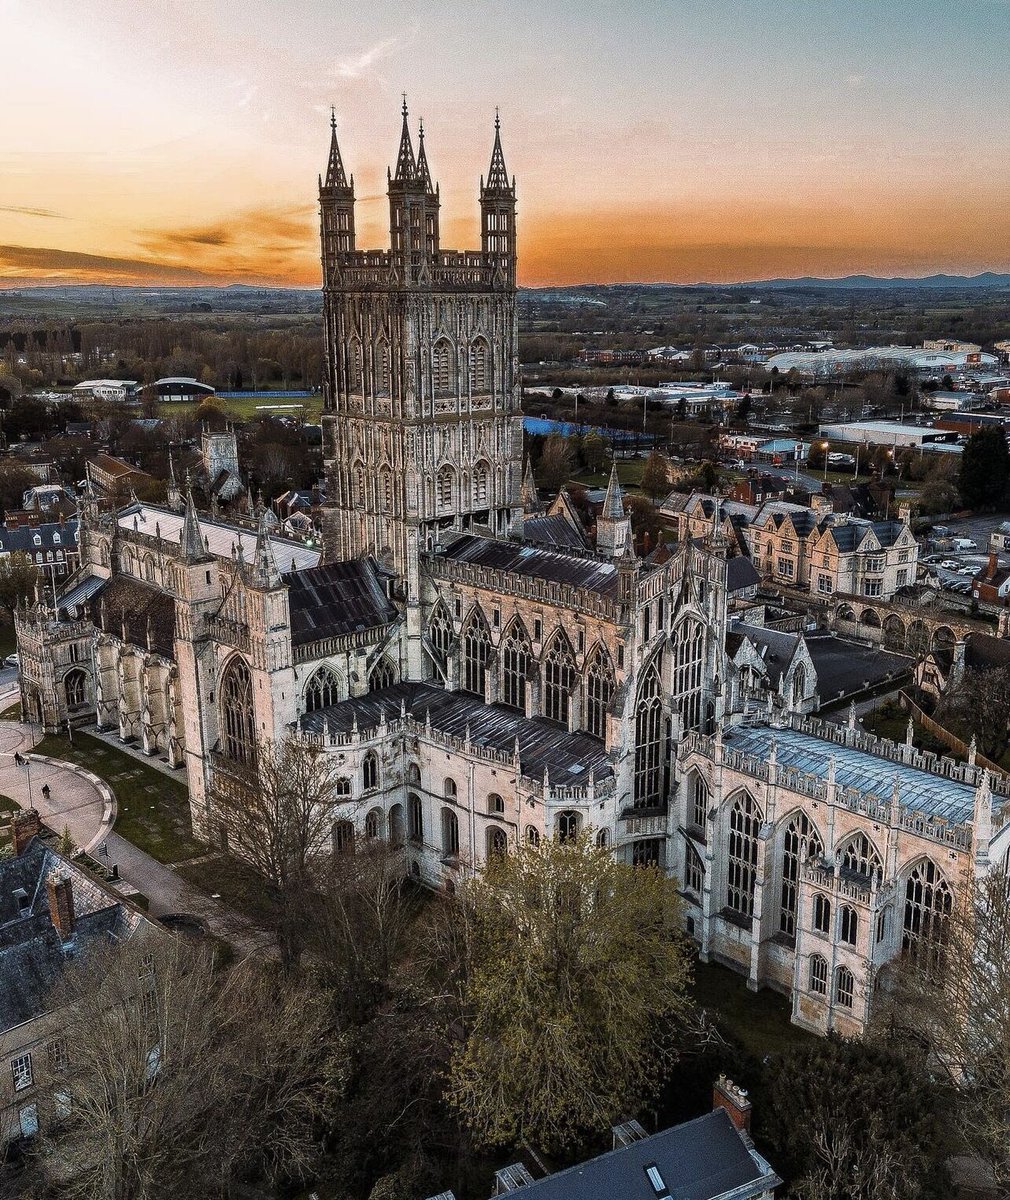 📸 @leevistal Another incredible shot of Gloucester Cathedral📍

Don’t forget to use #VisitGlosUK for the chance to be featured!

#Gloucestershire #gloucester #gloucestercathedral